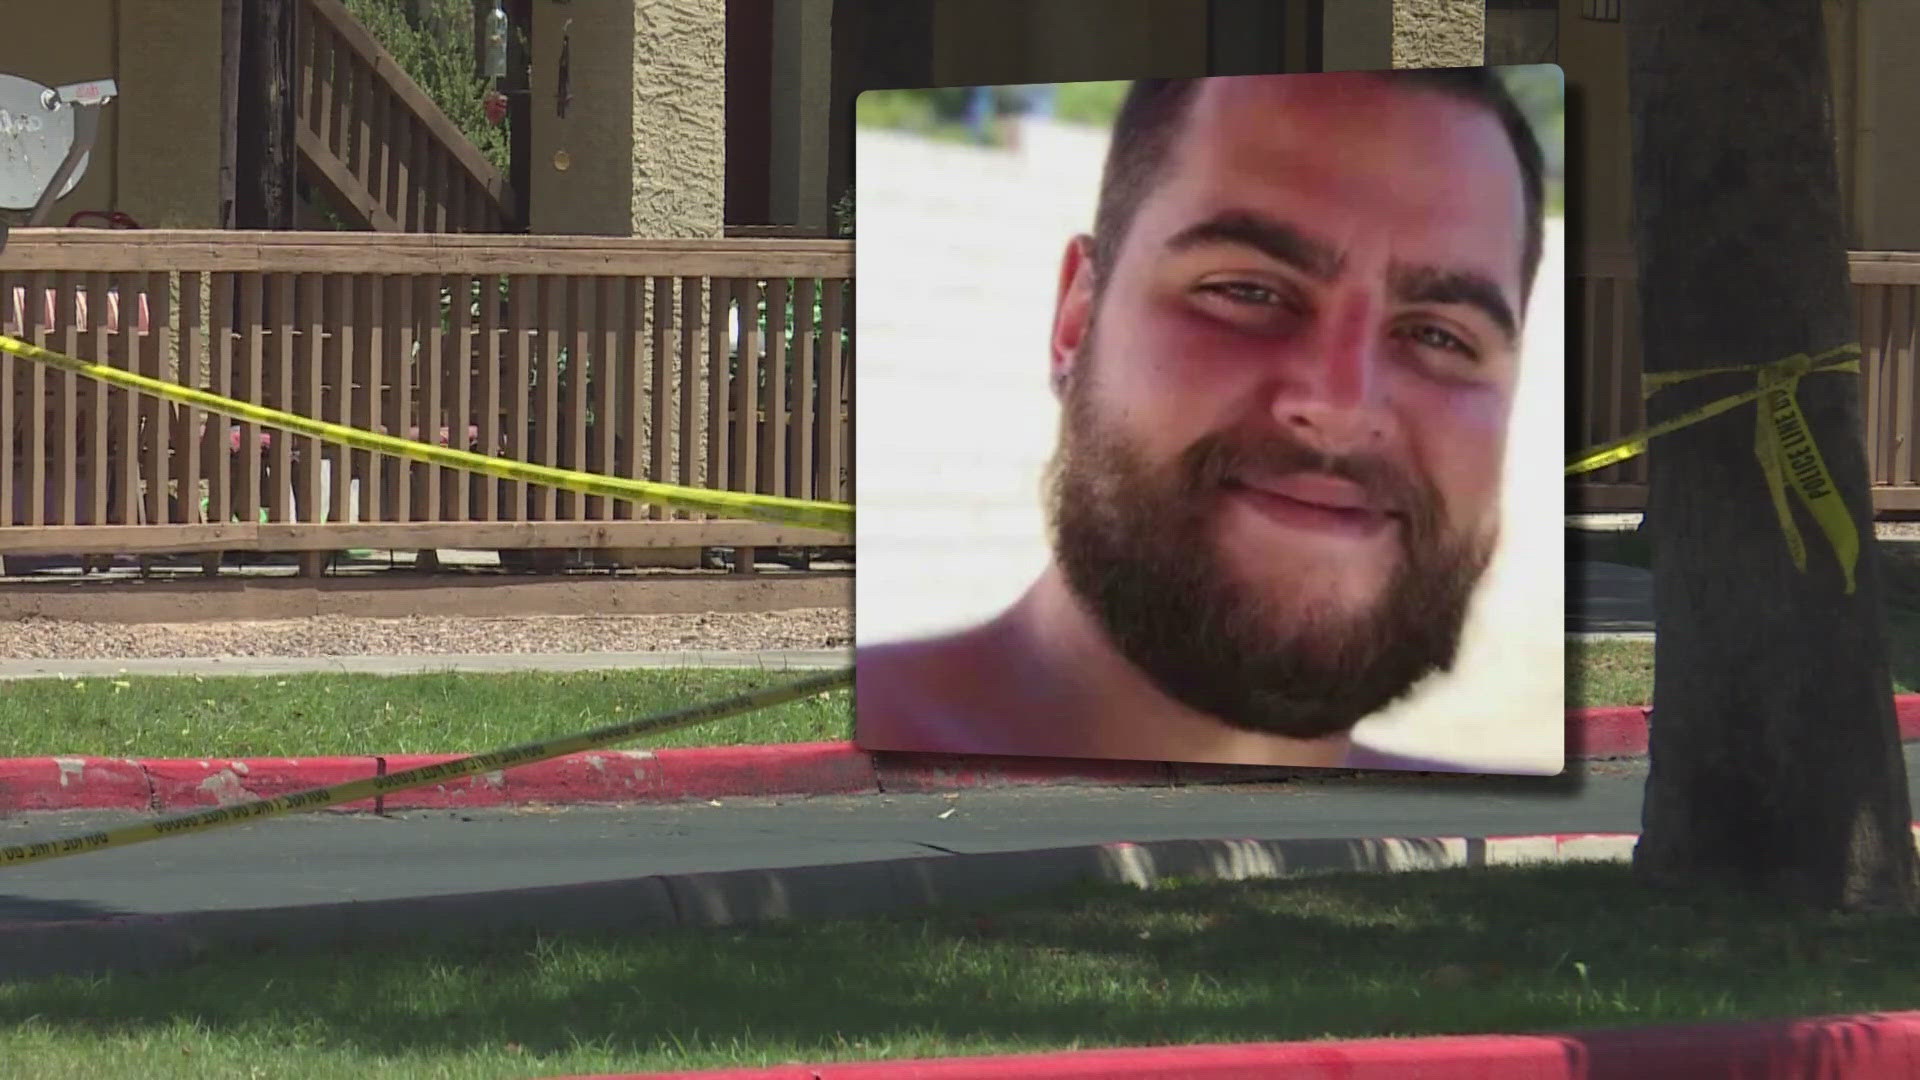 The family of a man shot shot and killed by Mesa police is now suing the department for wrongful death.